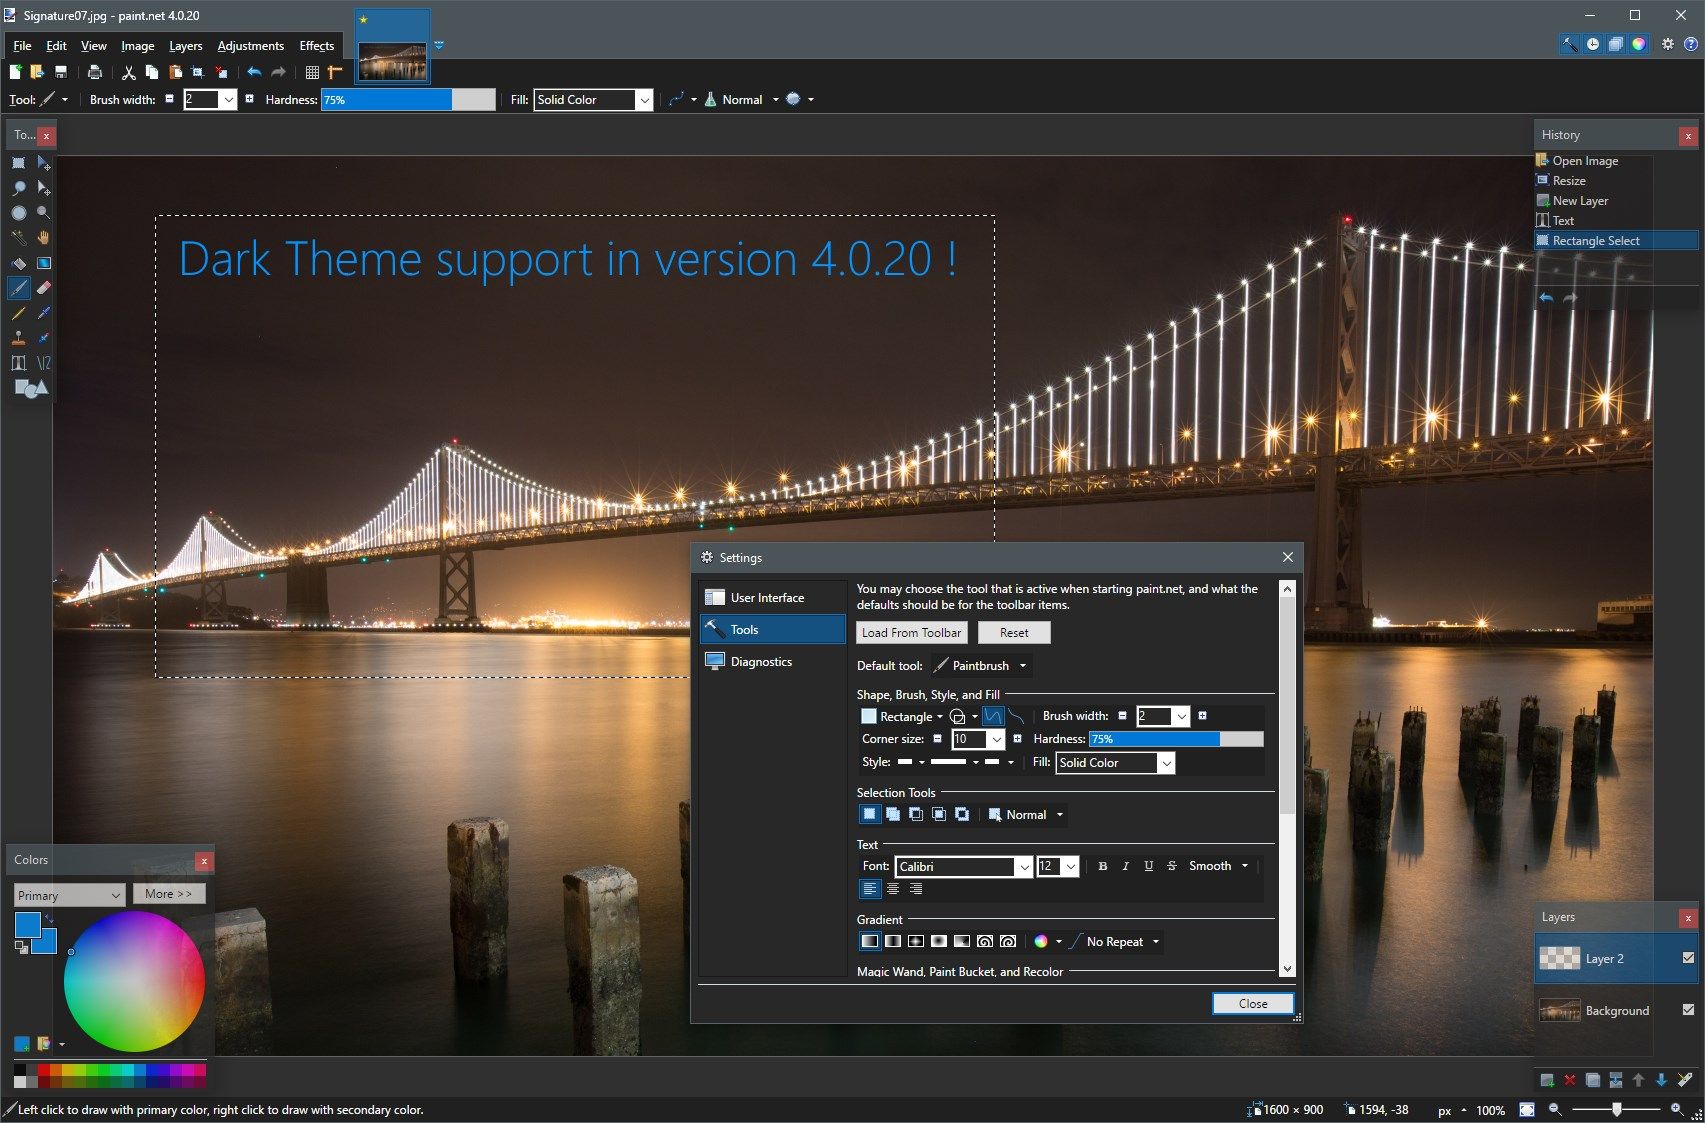 Dark Theme supported added in version 4.0.20